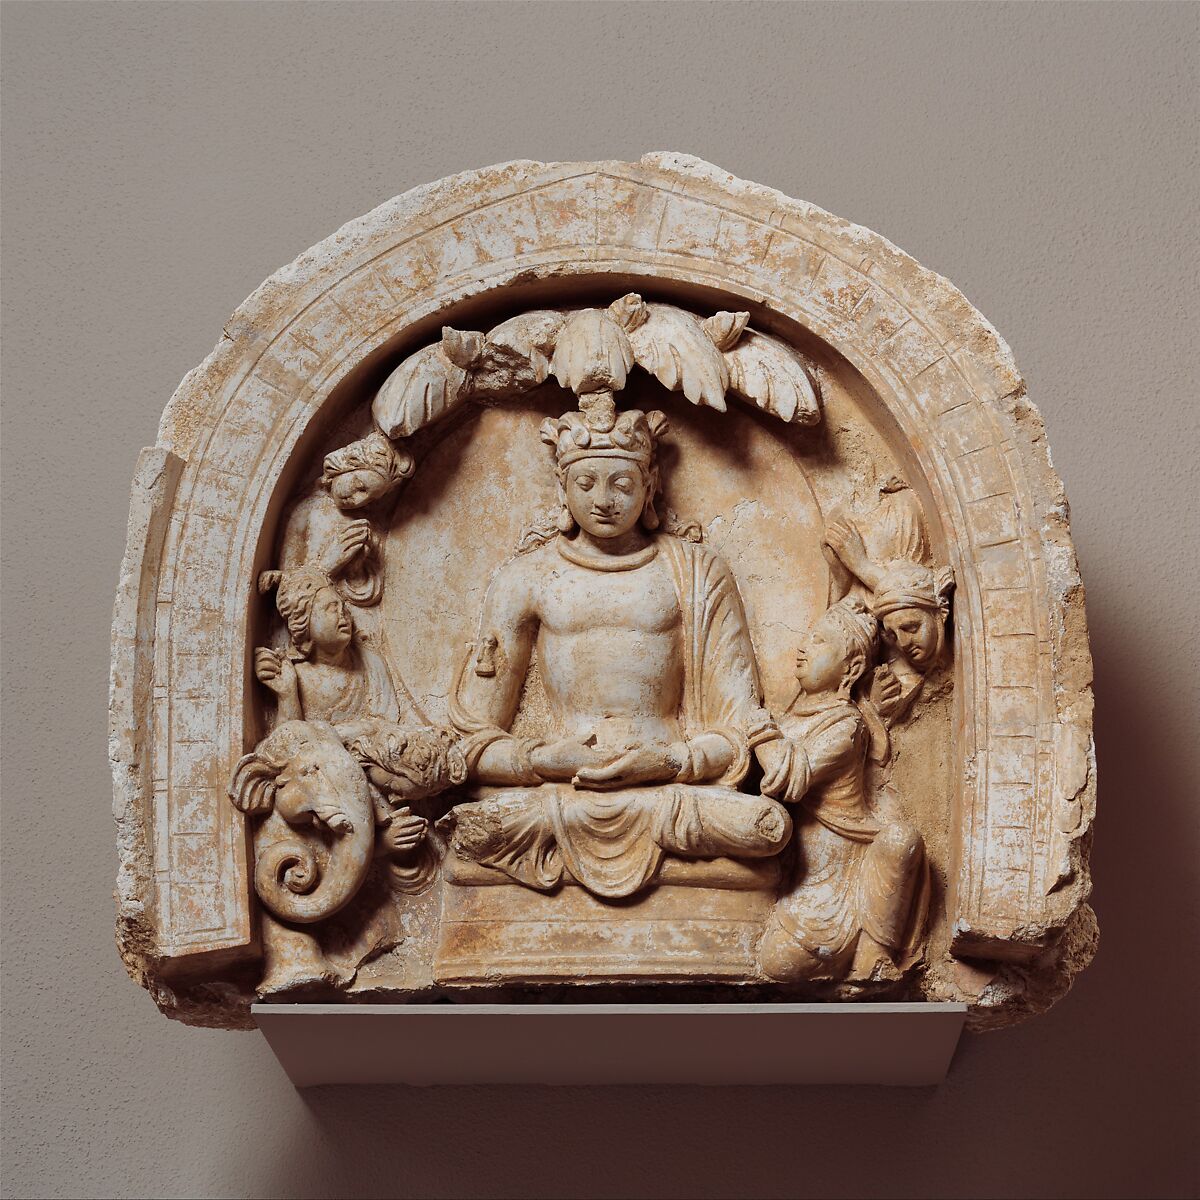 Niche with the Seated Bodhisattva Shakyamuni Flanked by Devotees and an Elephant, Stucco, Afghanistan (Hadda) 